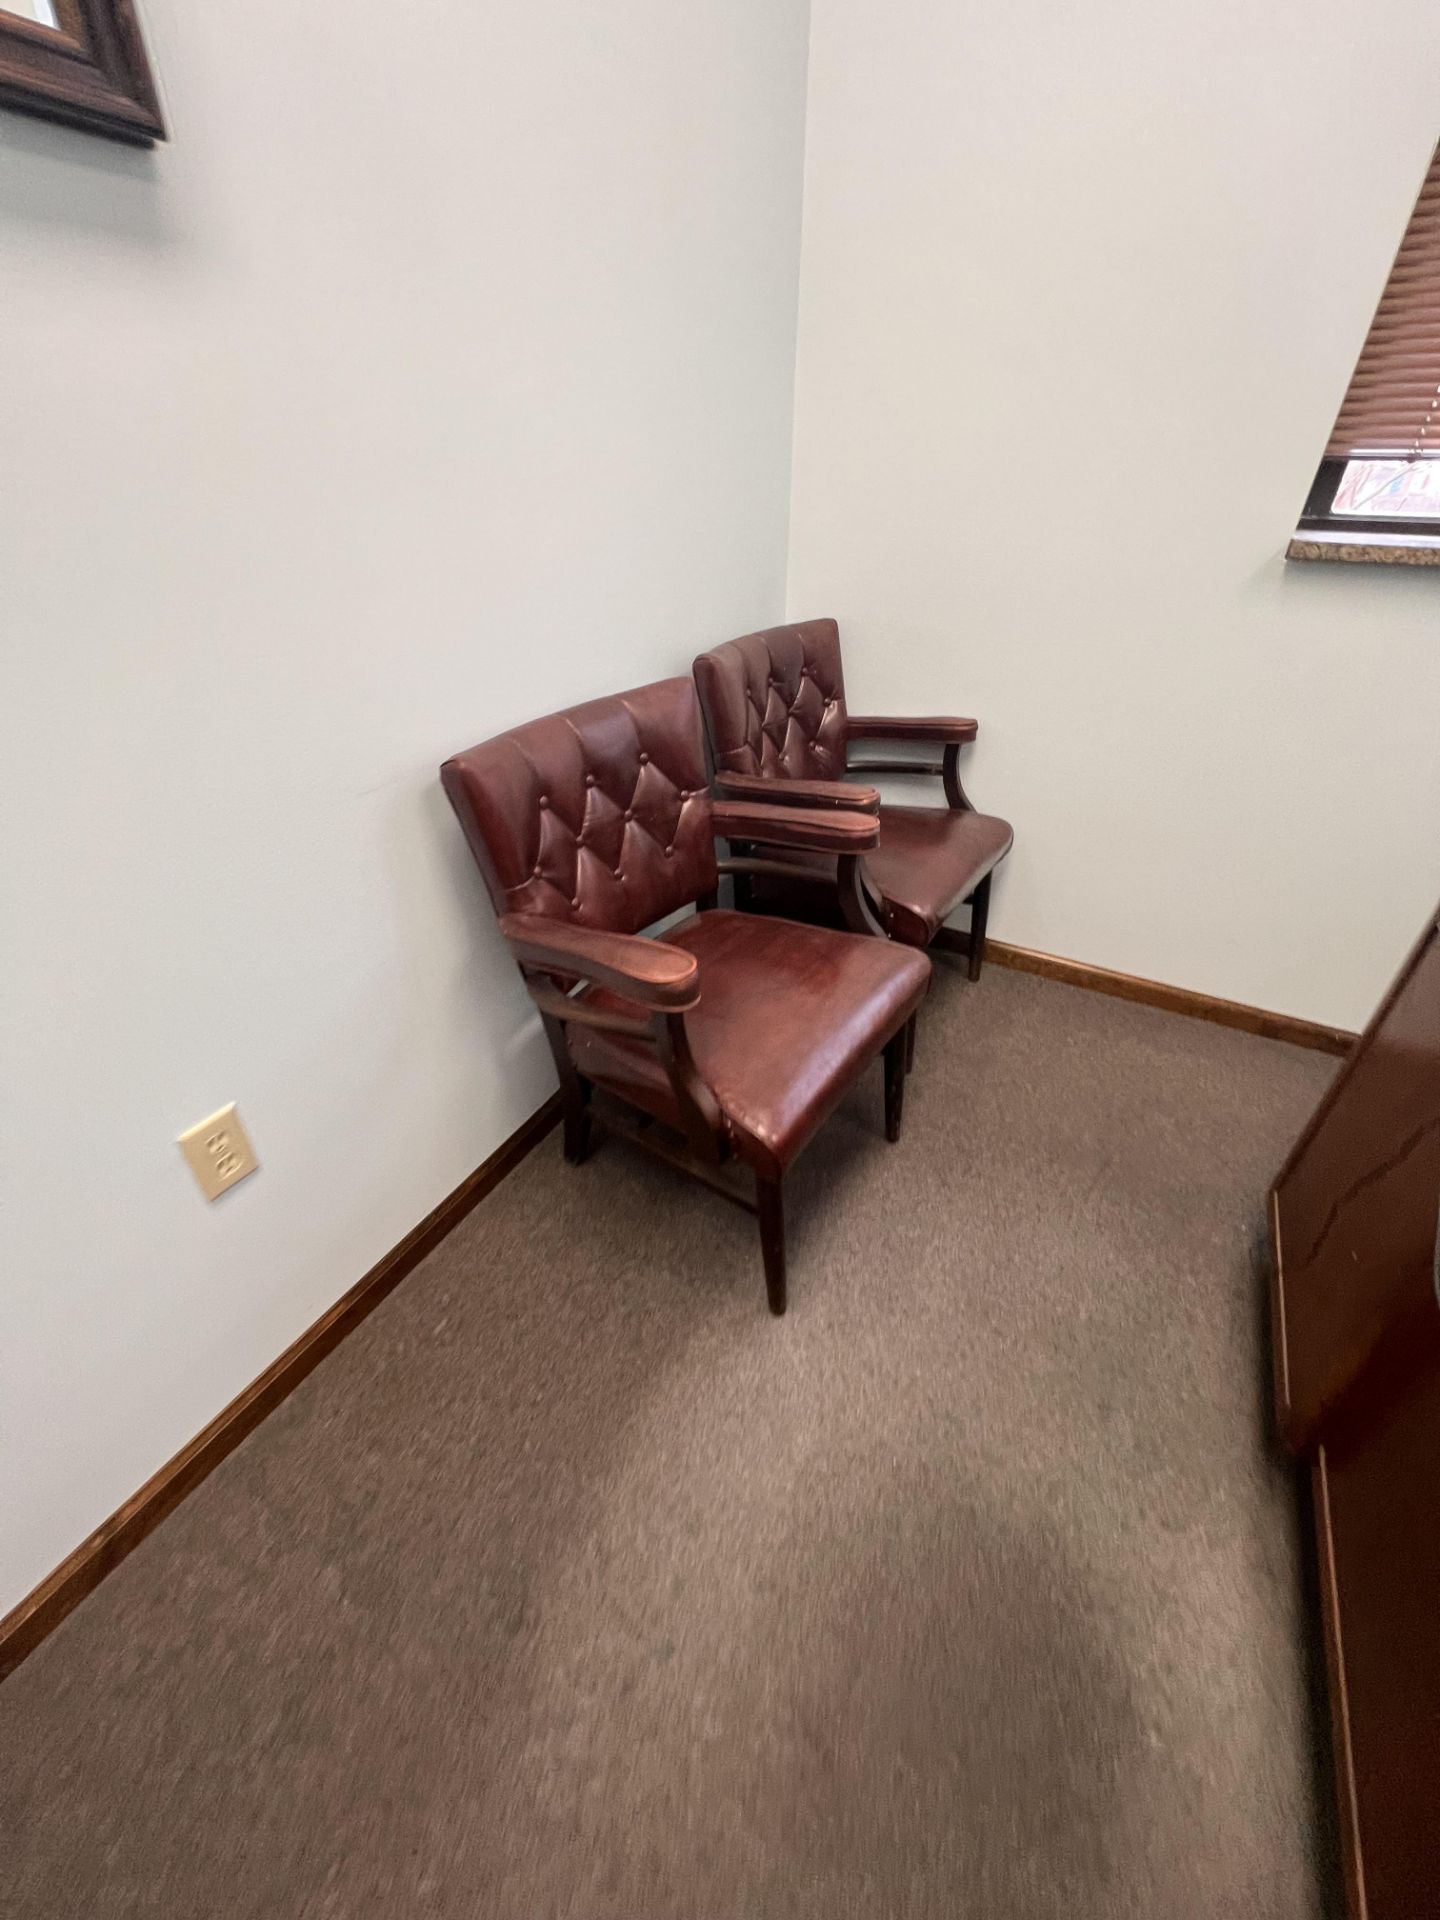 CONTENTS OF OFFICE, INCLUDES WOOD DESK, CHAIRS, 2-DOOR FILE CABINET, DOES NOT INCLUDE COMPUTERS OR - Image 2 of 4